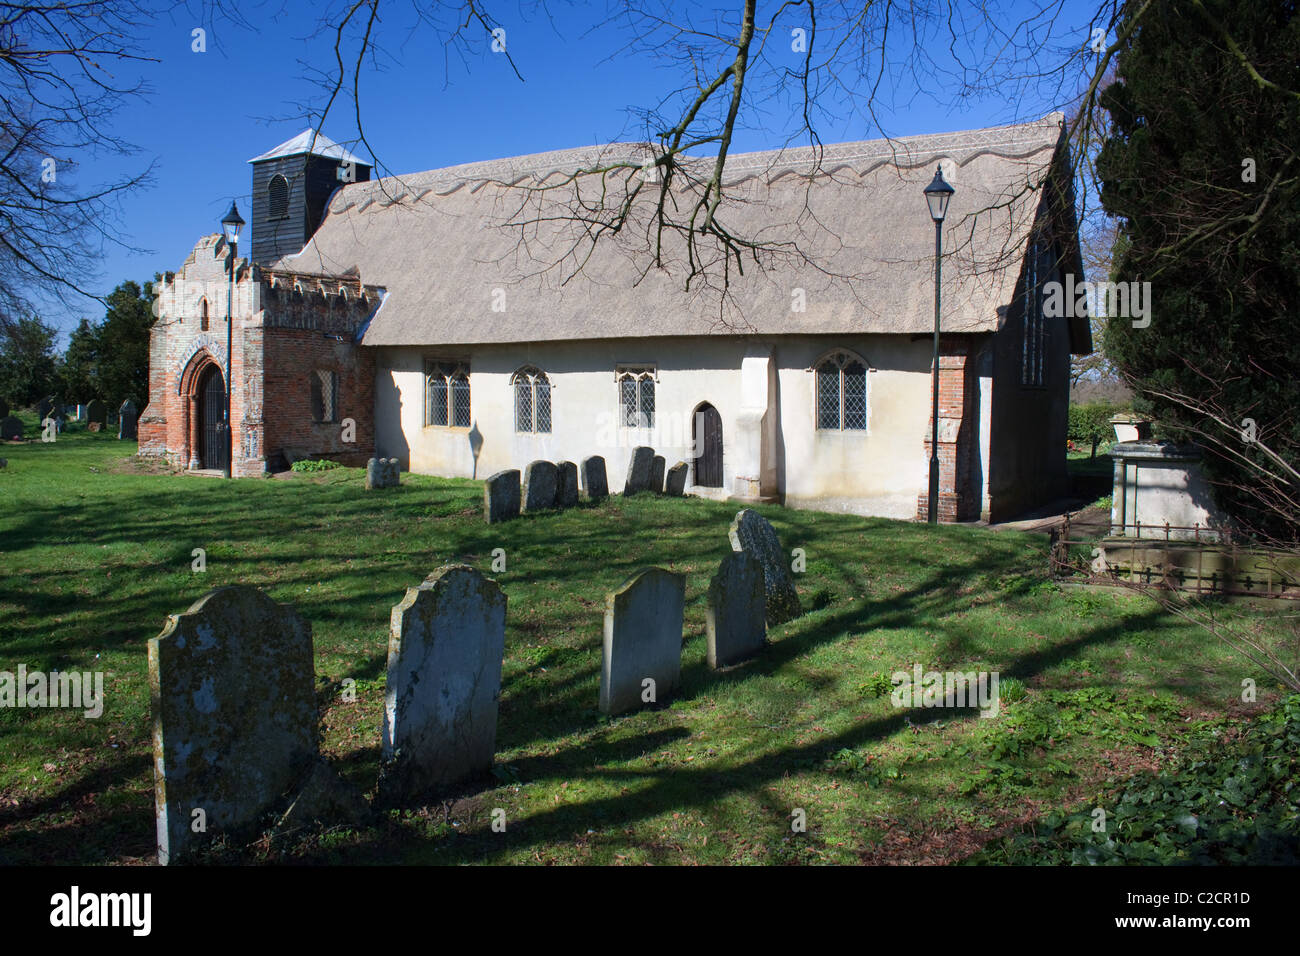 The old thatched church at Ixworth Thorpe in West Suffolk, England Stock Photo